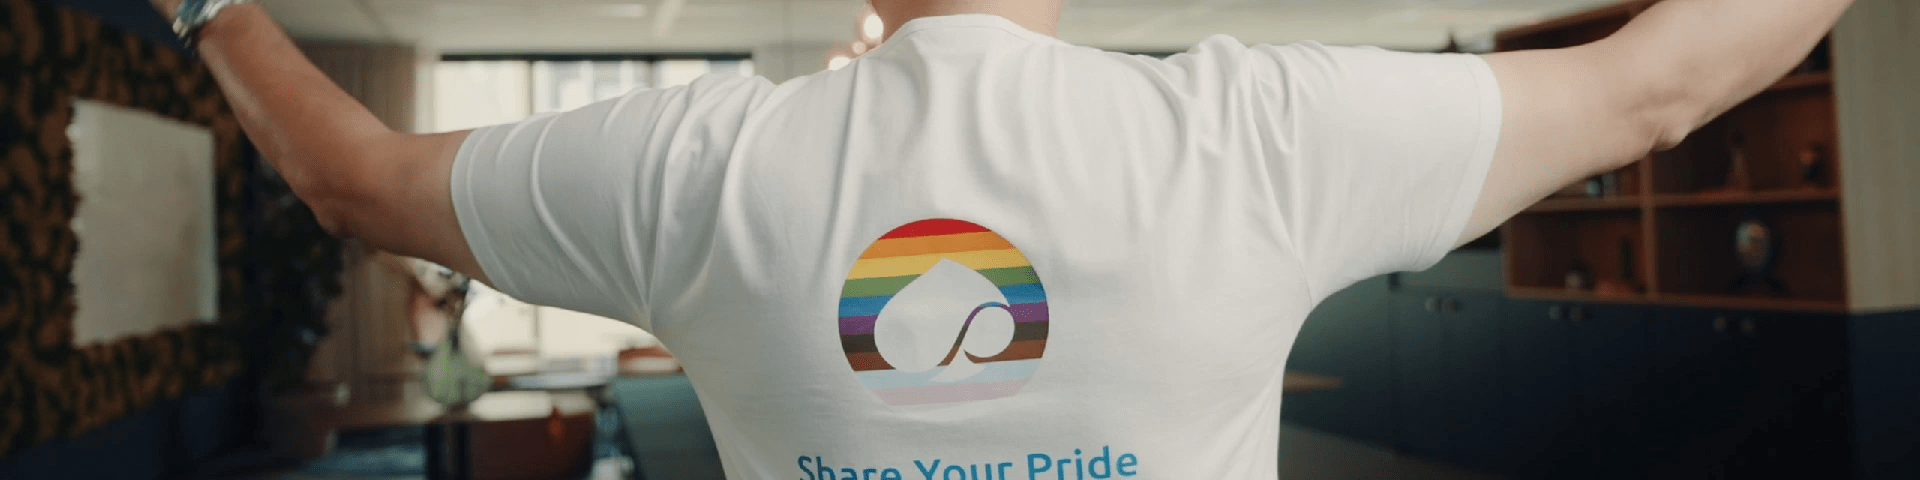 share-your-pride-get-the-future